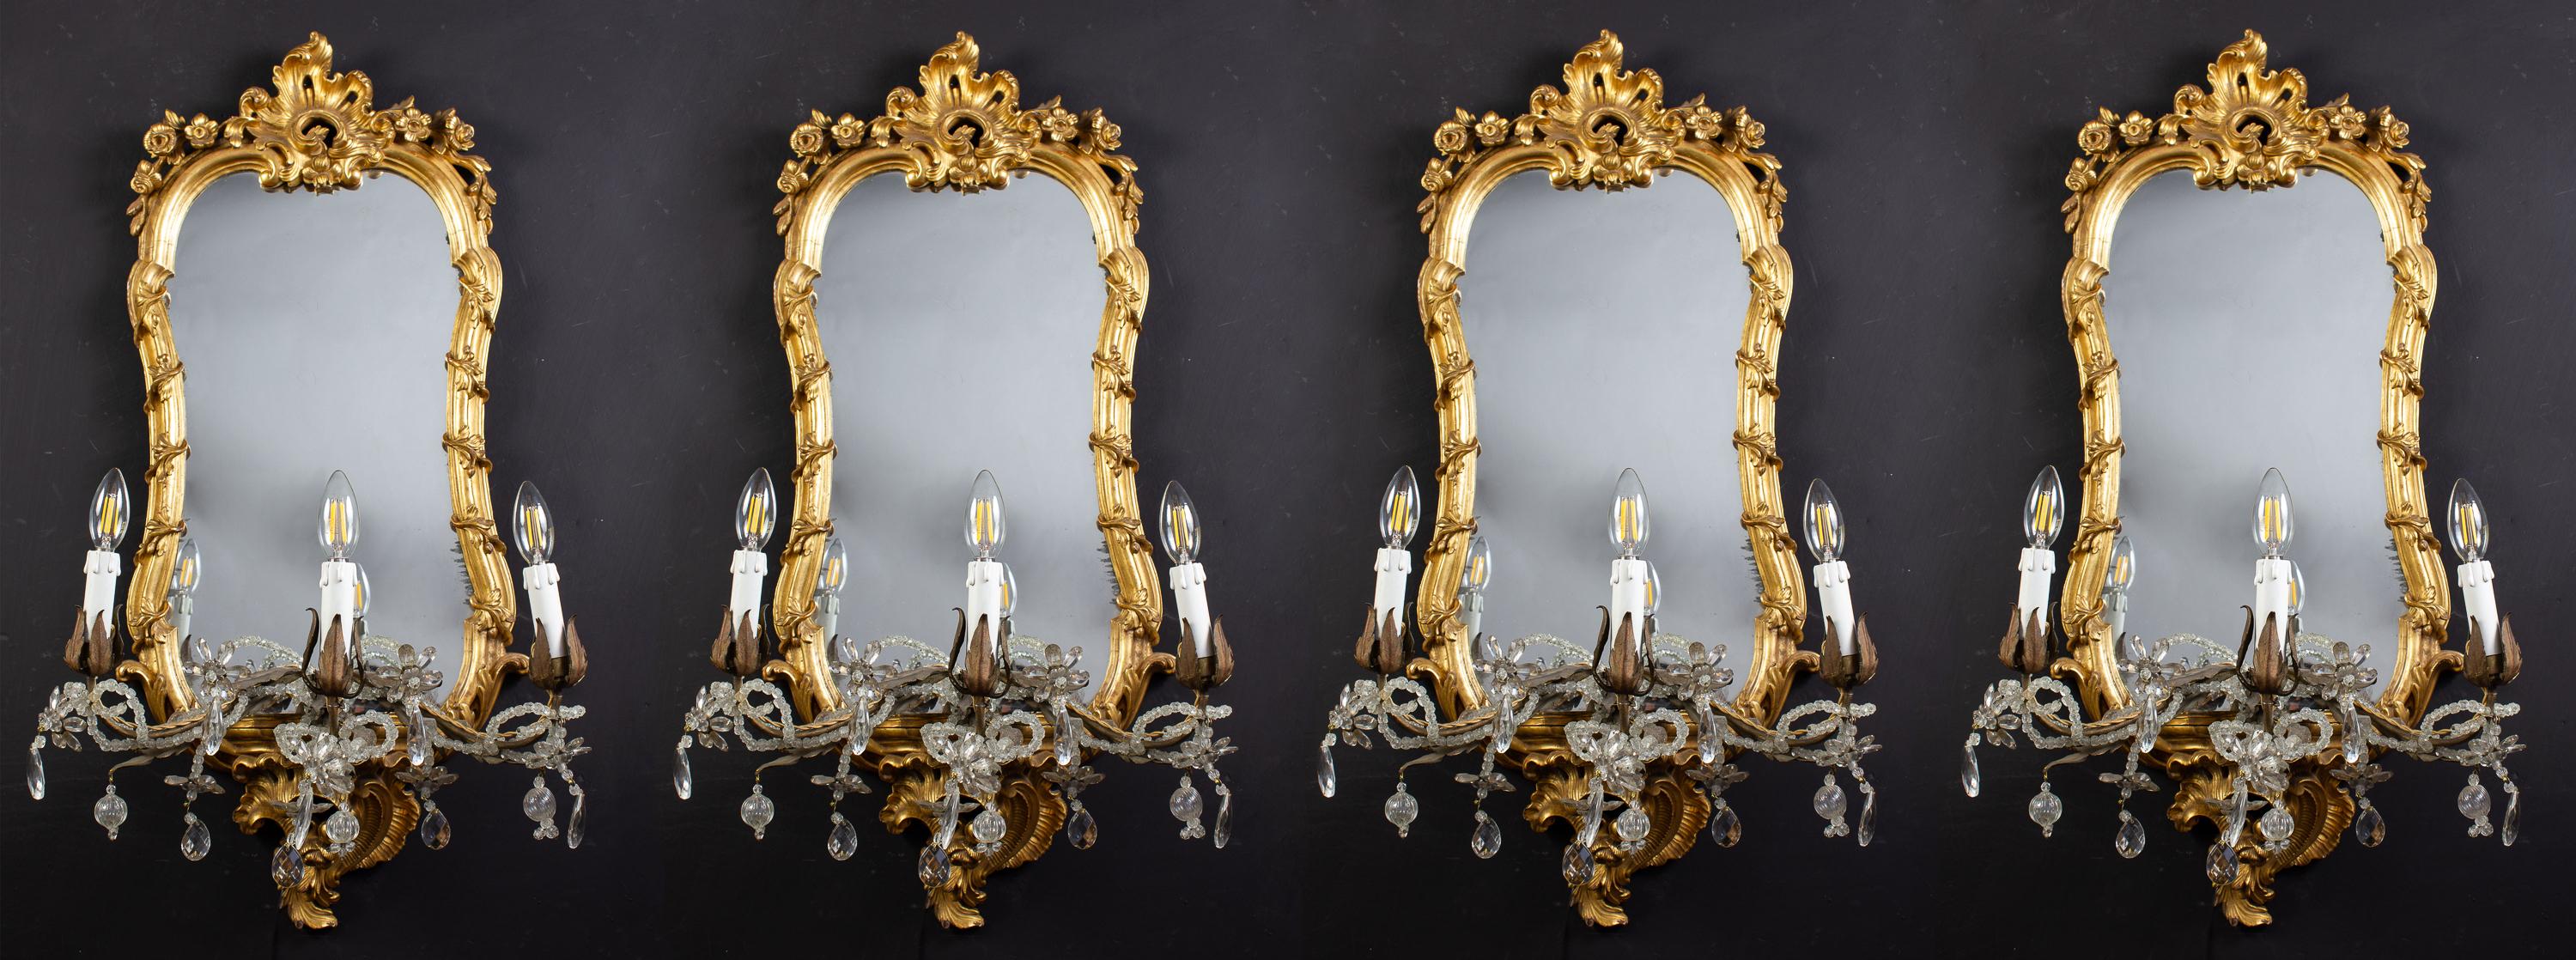 Four 18th Century Italian Giltwood Mirrors or Wall Lights Roma, 1750 For Sale 10